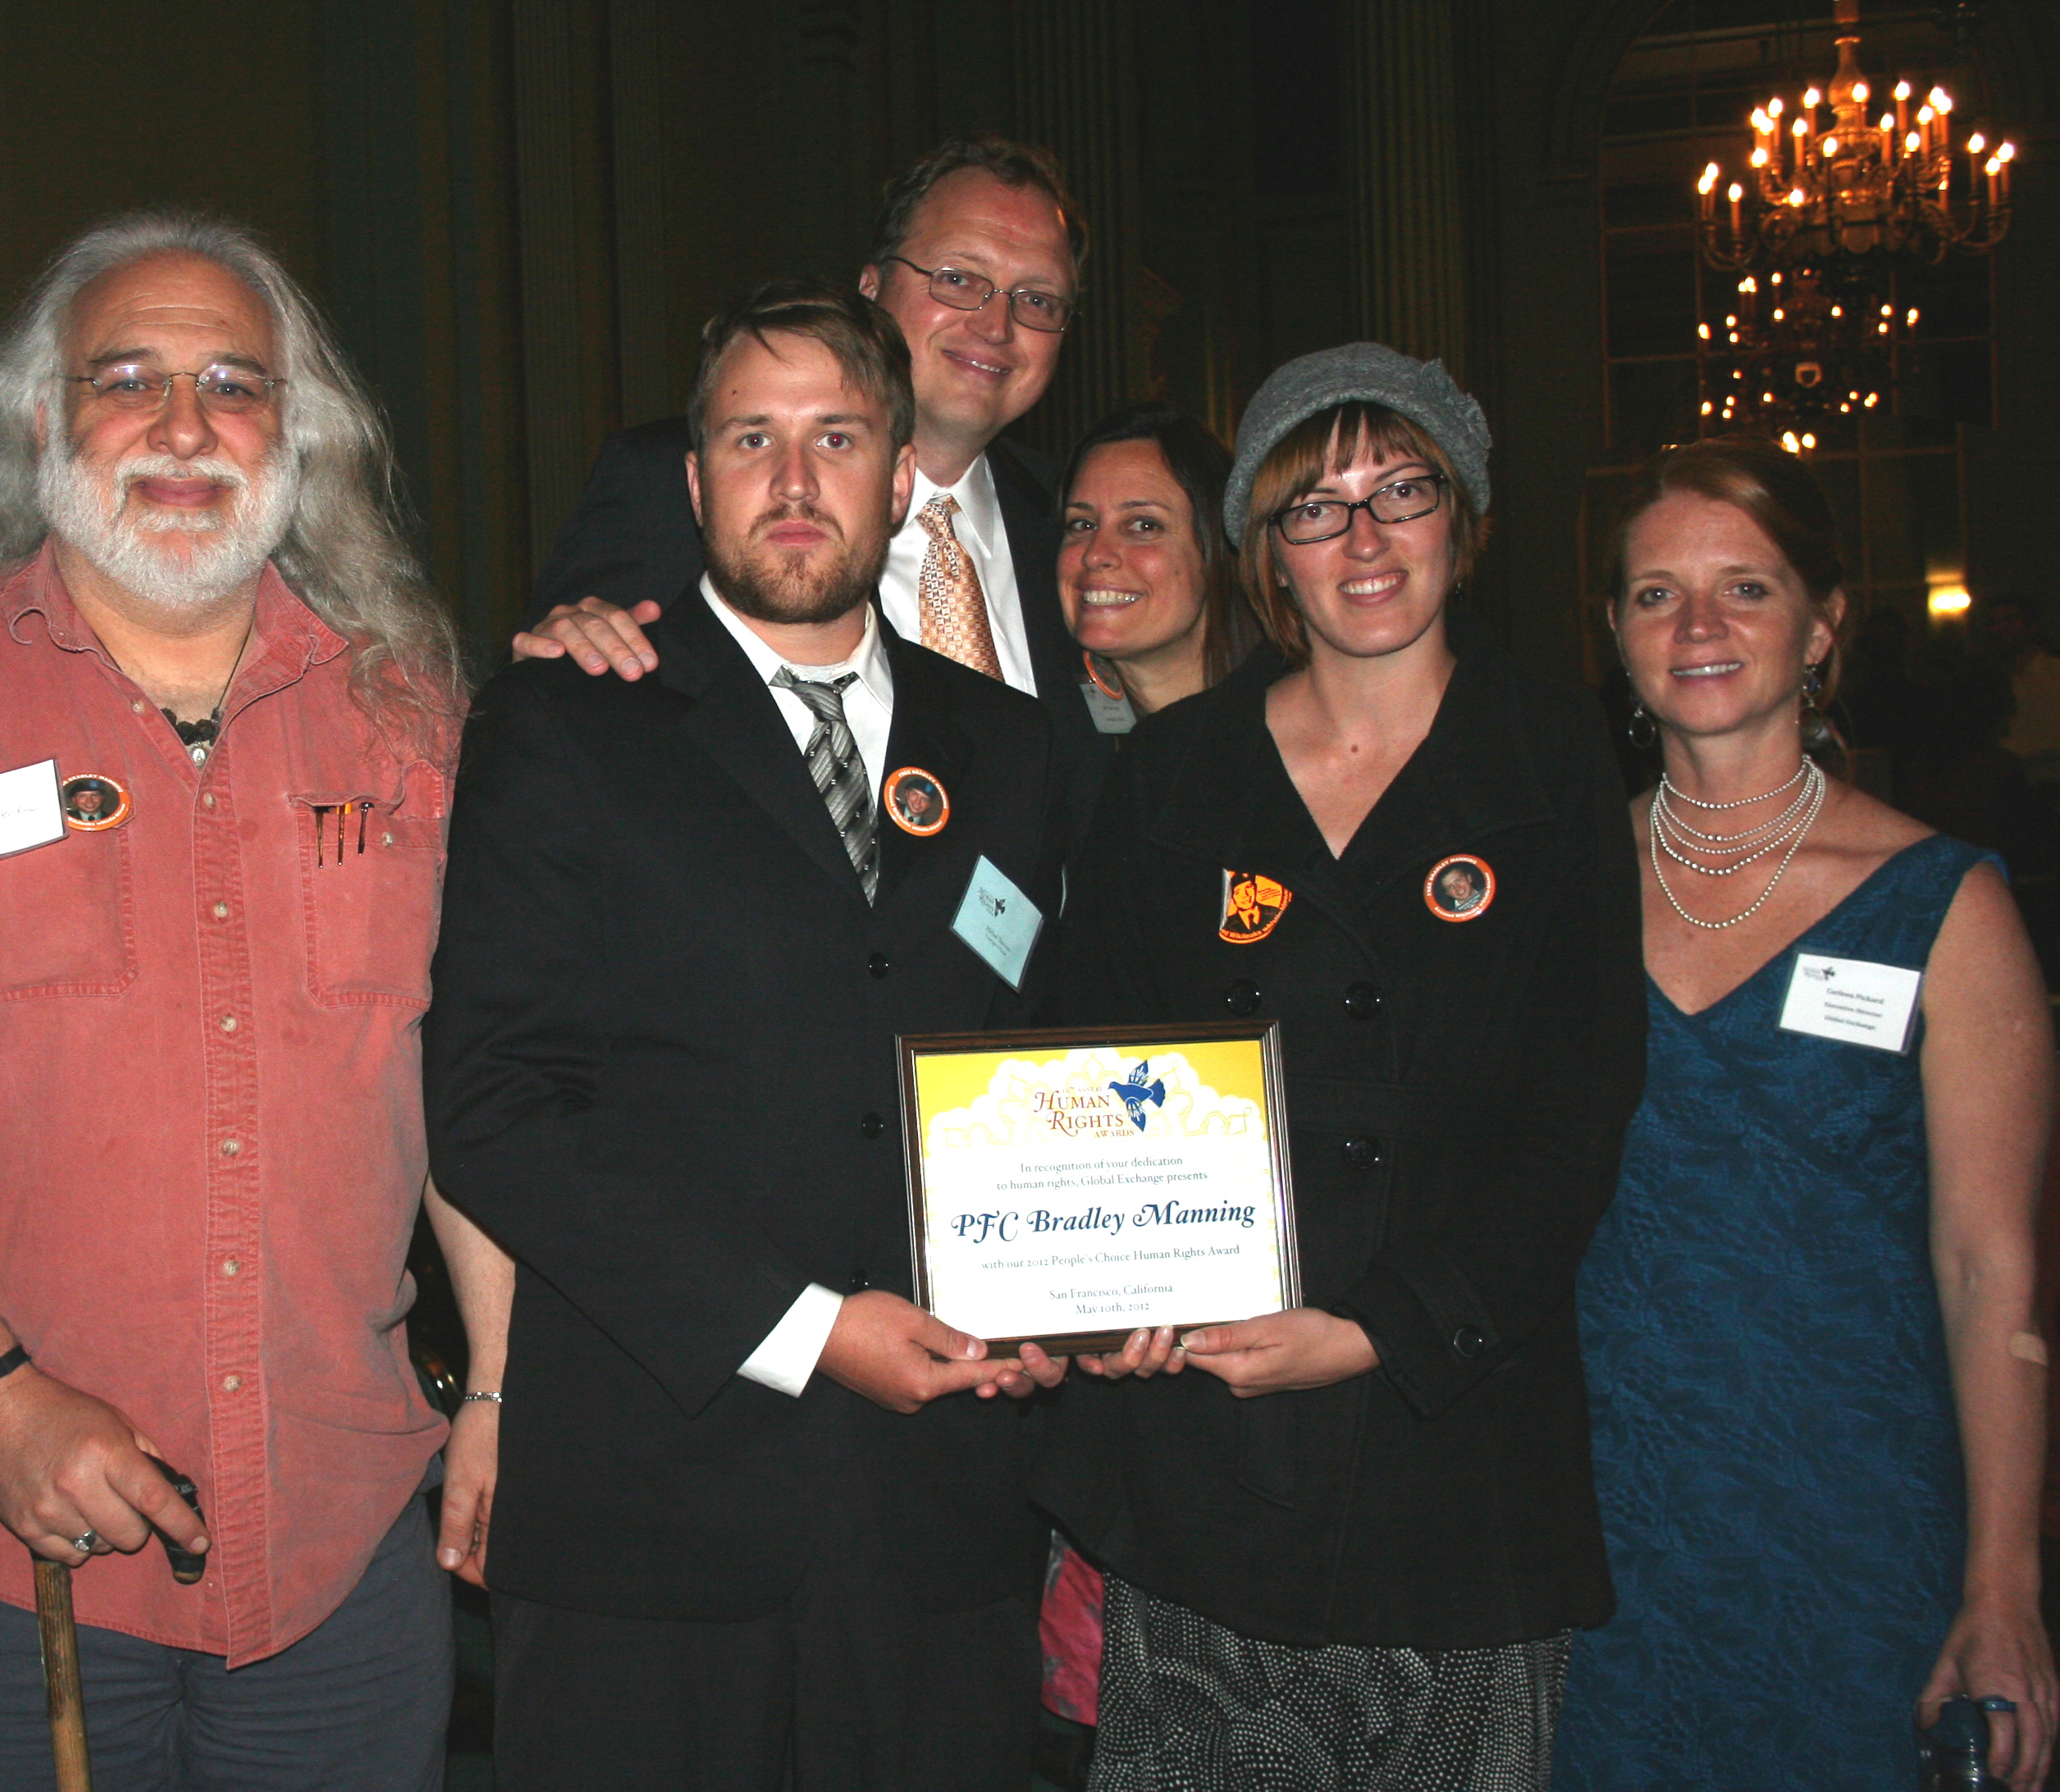 Bradley Manning Support Network guests with People's Choice Award and Carleen Pickard